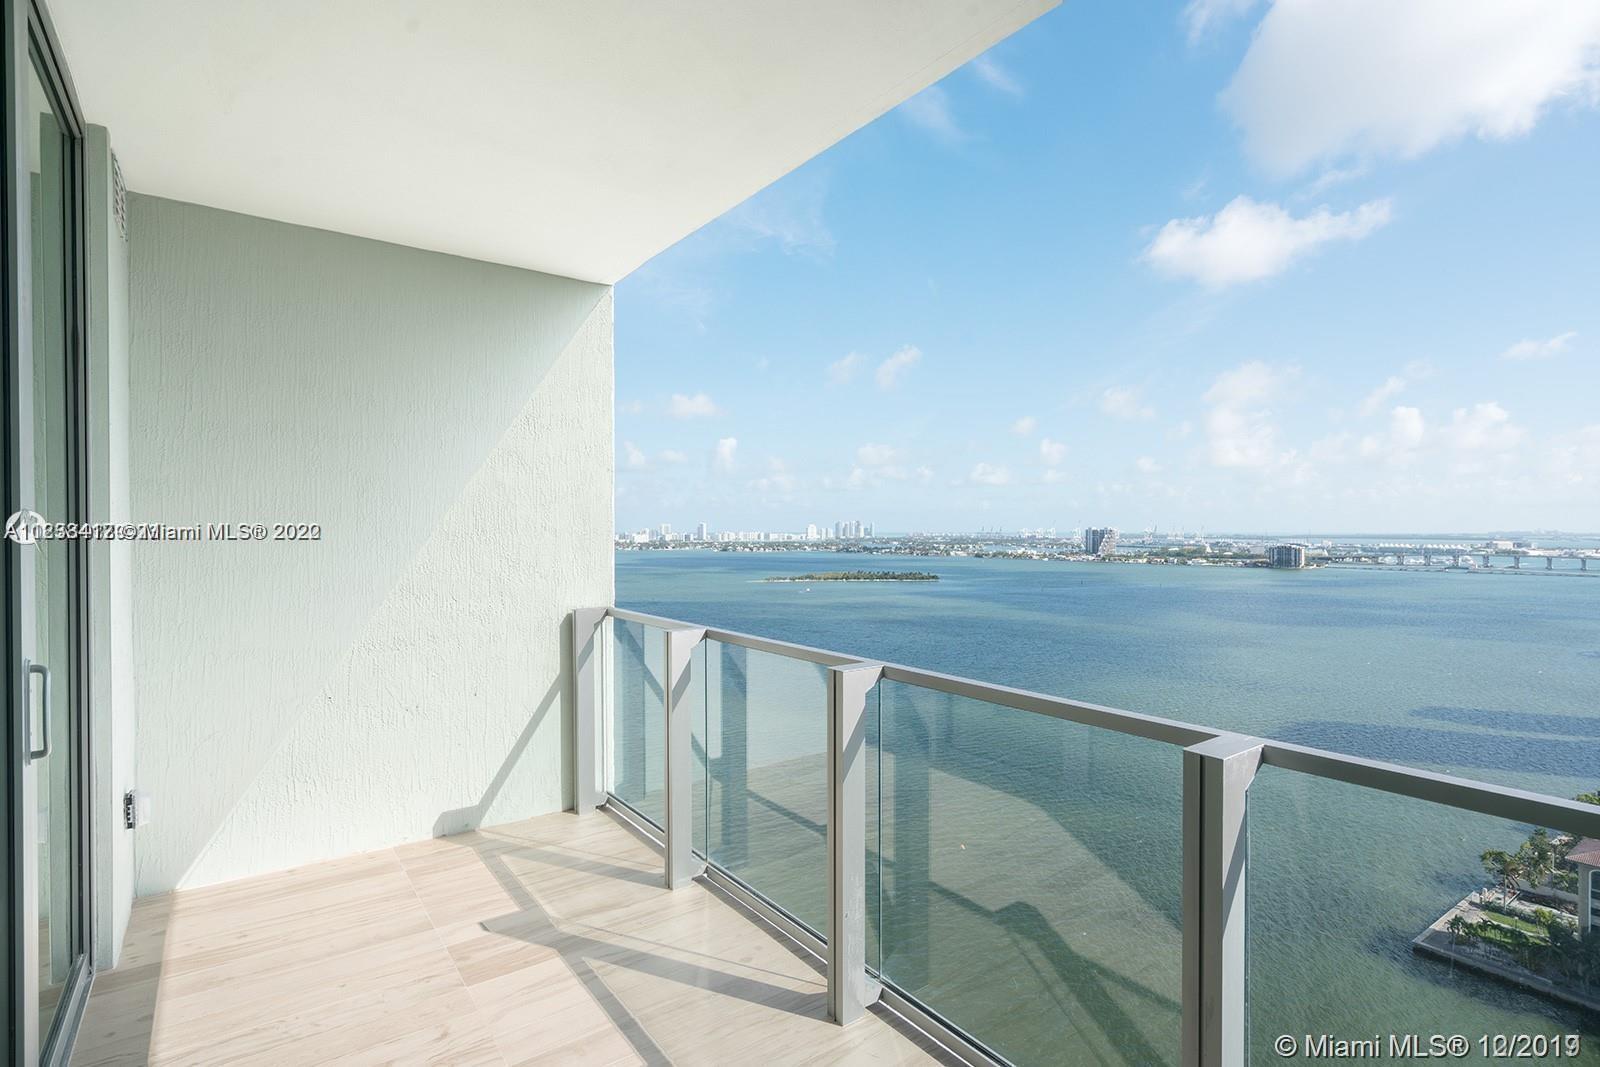 Bright, modern & exclusive residence @ Biscayne Beach Condo, one of the best waterfront buildings at Edgewater. 1 Bedroom + Den, 2 Full Bathrooms Residence with Private Foyer. Water views from everywhere , wood floors through out, floor to ceiling impact windows, top of the line appliances (Bosch), Luxury resort style condominium amenities. Excellent location at Edgewater, close to everything.